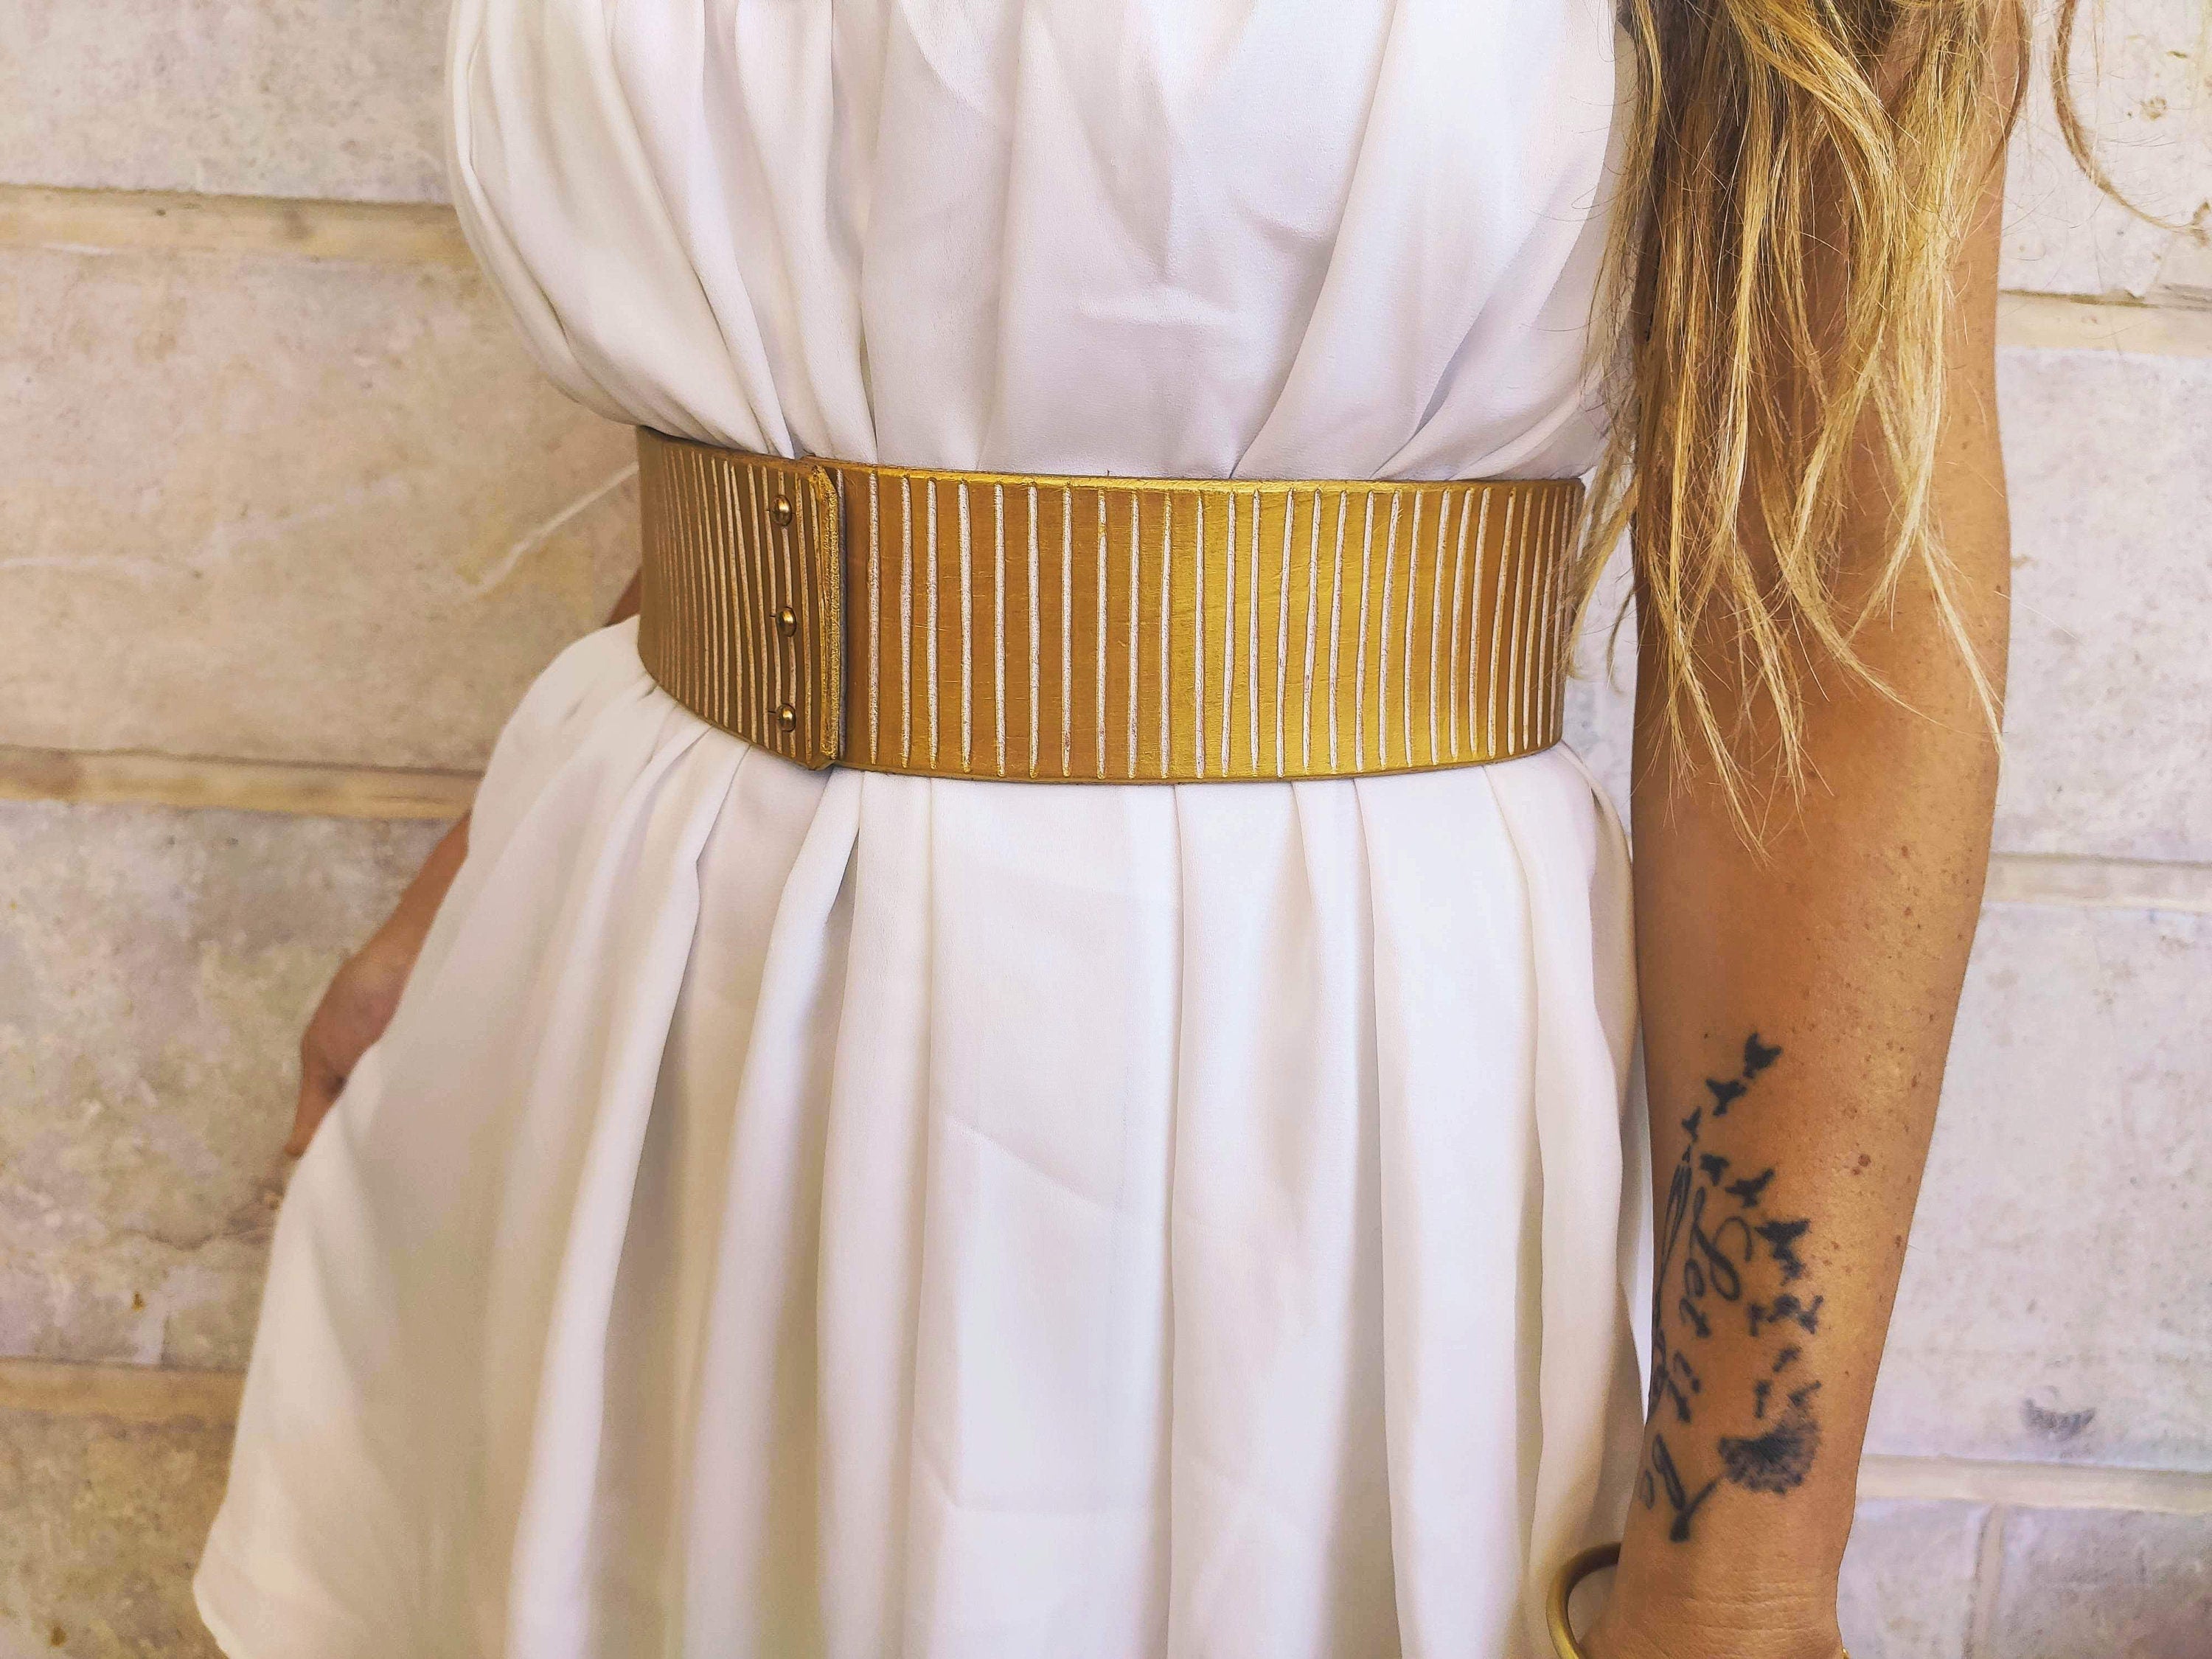 Bridal Belts, white & gold leather belt for wedding dress made by hand exactly to your size. wedding belt, dress belt, white dress belt.